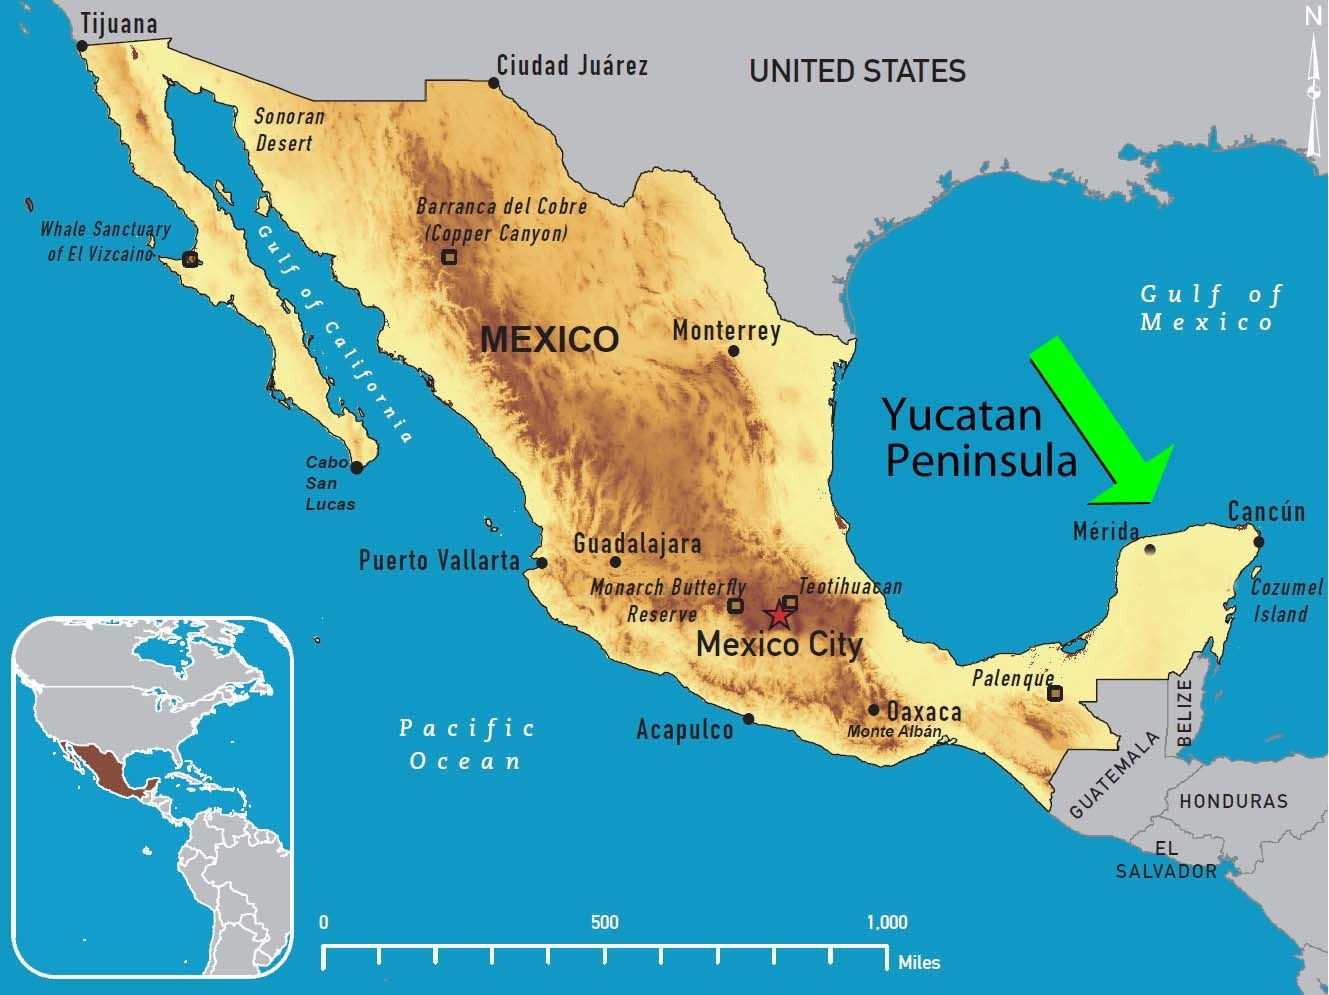 Yucatan Peninsula, where the crater is for the extinction of the dinosaurs.